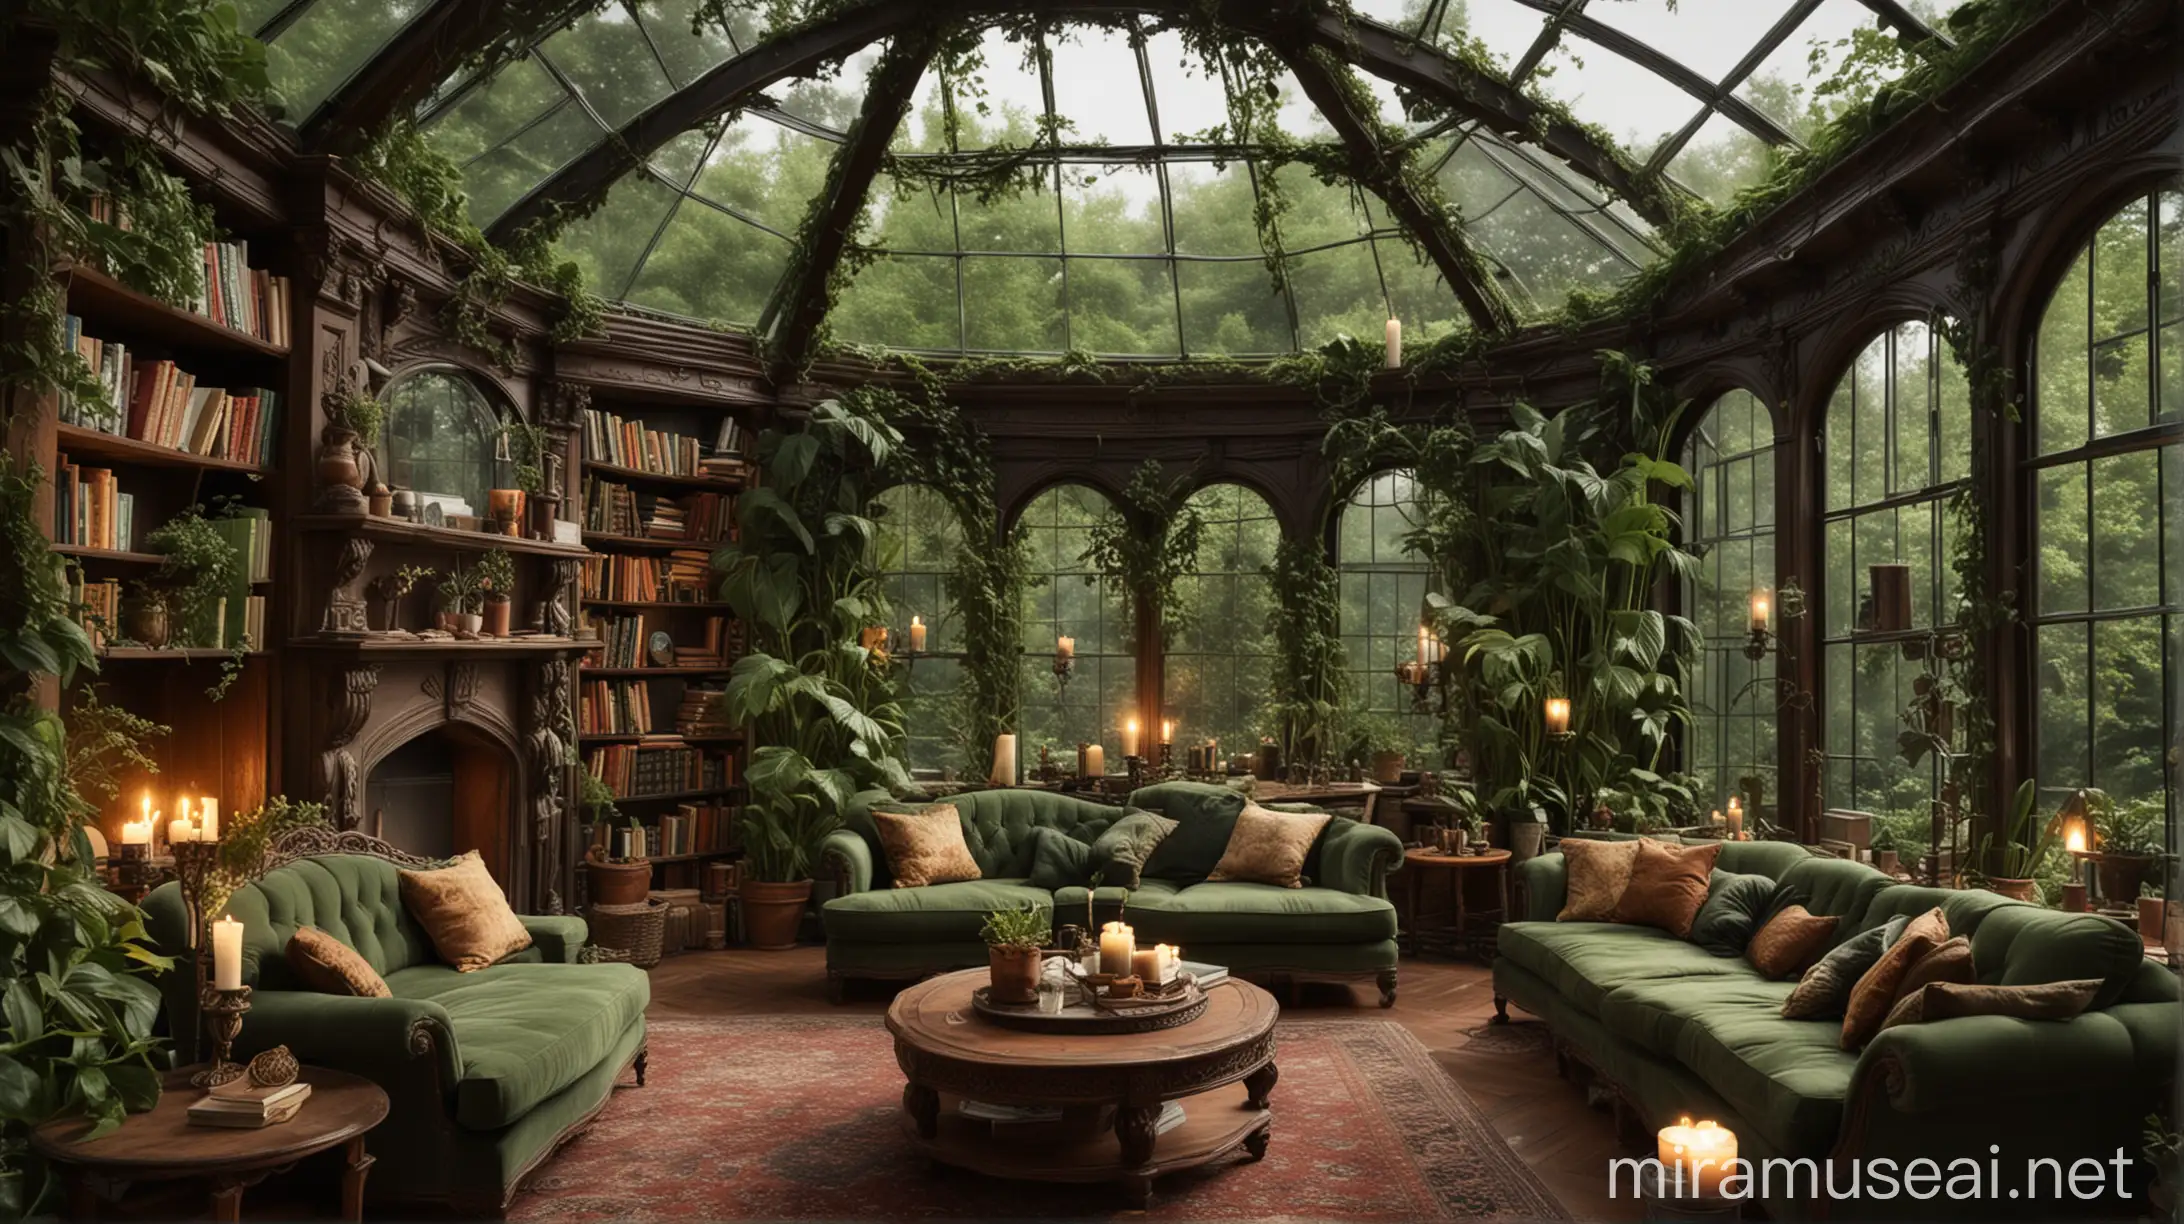 Enchanted Library Retreat Magical Greenhouse Lounge with Cozy Fireplace